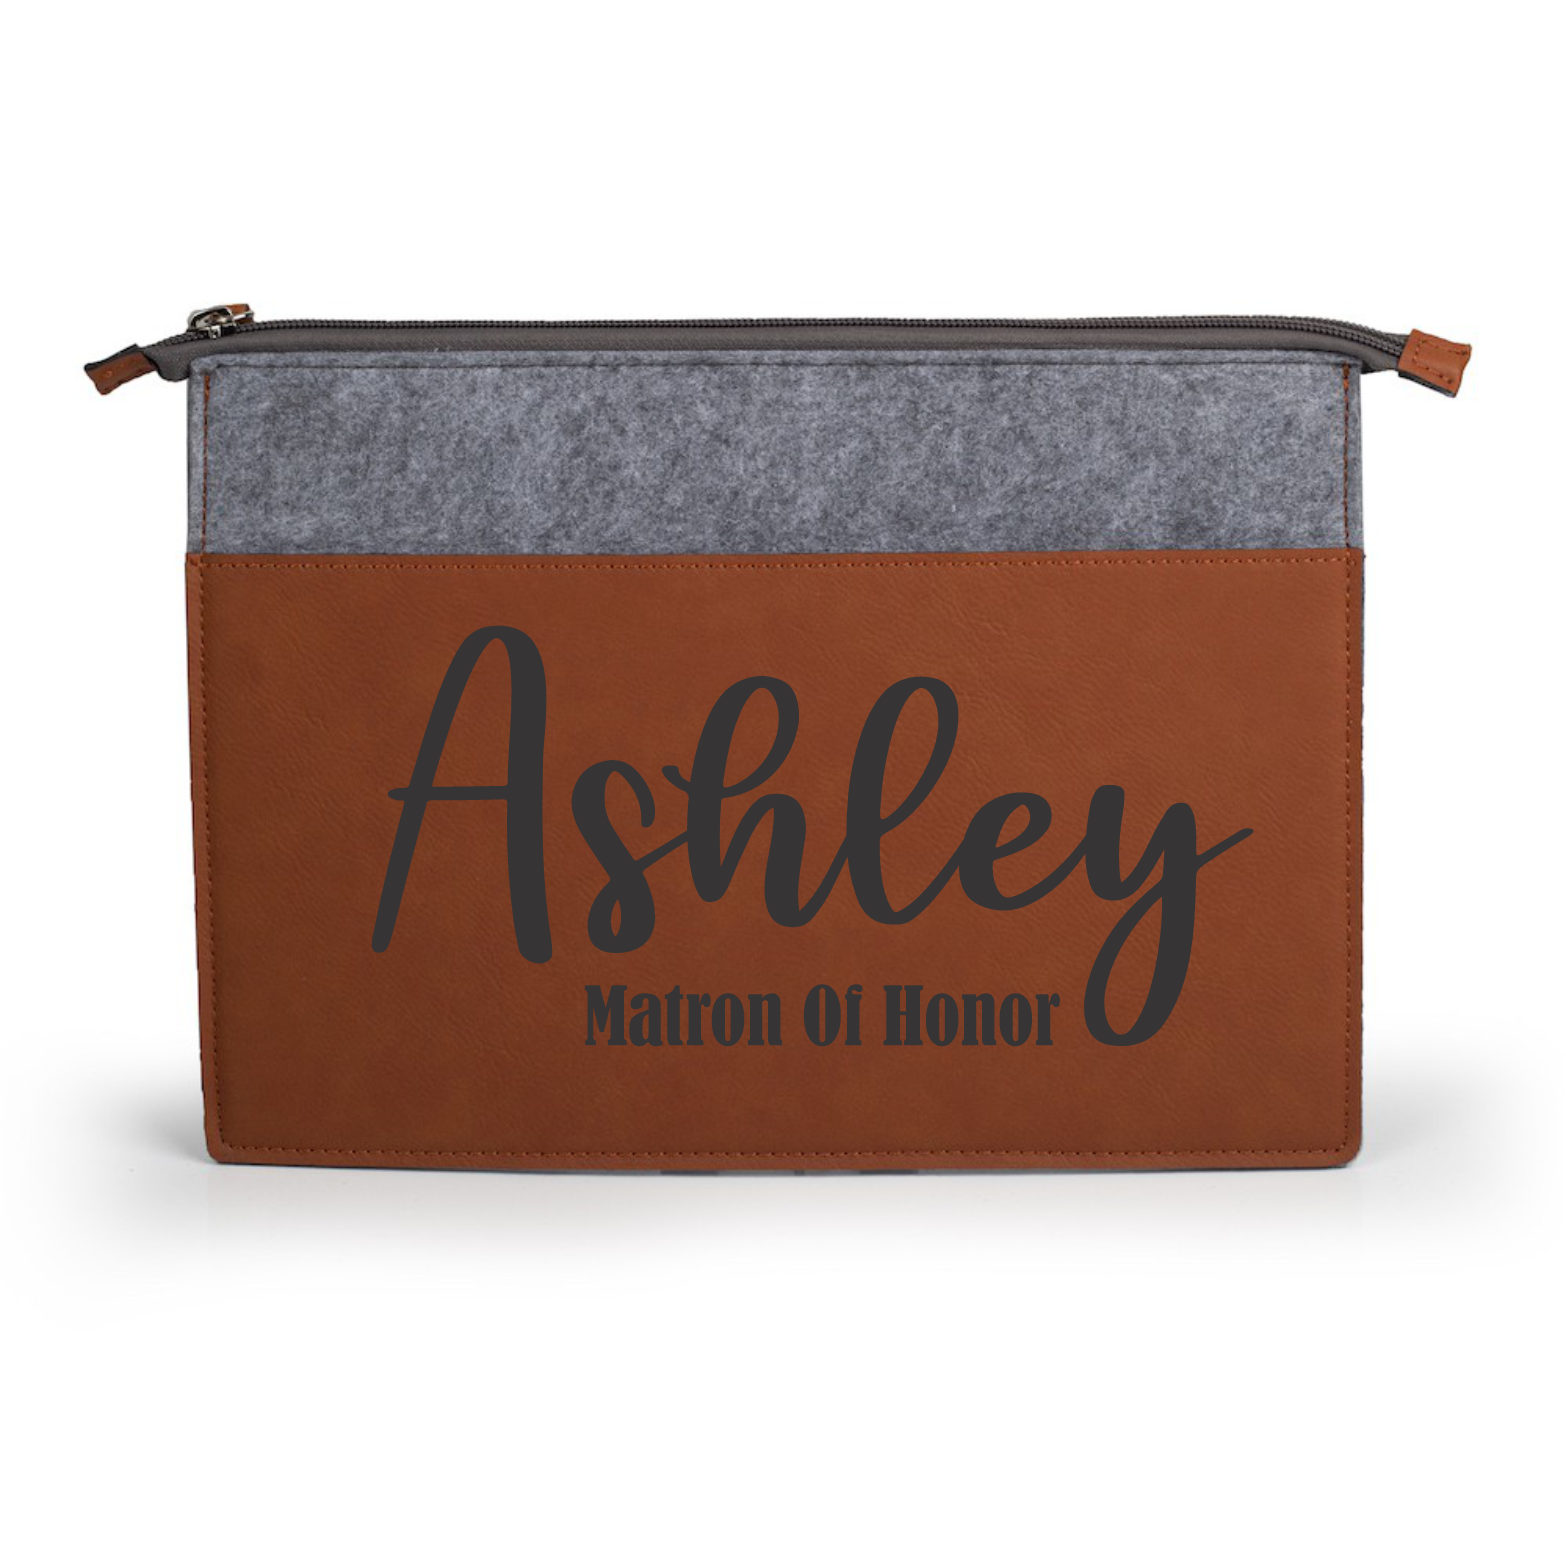 Leather & Grey Fabric Makeup Bag - Name with Option to Add Title - Laser Engraved - High Quality - Wedding Party Gift